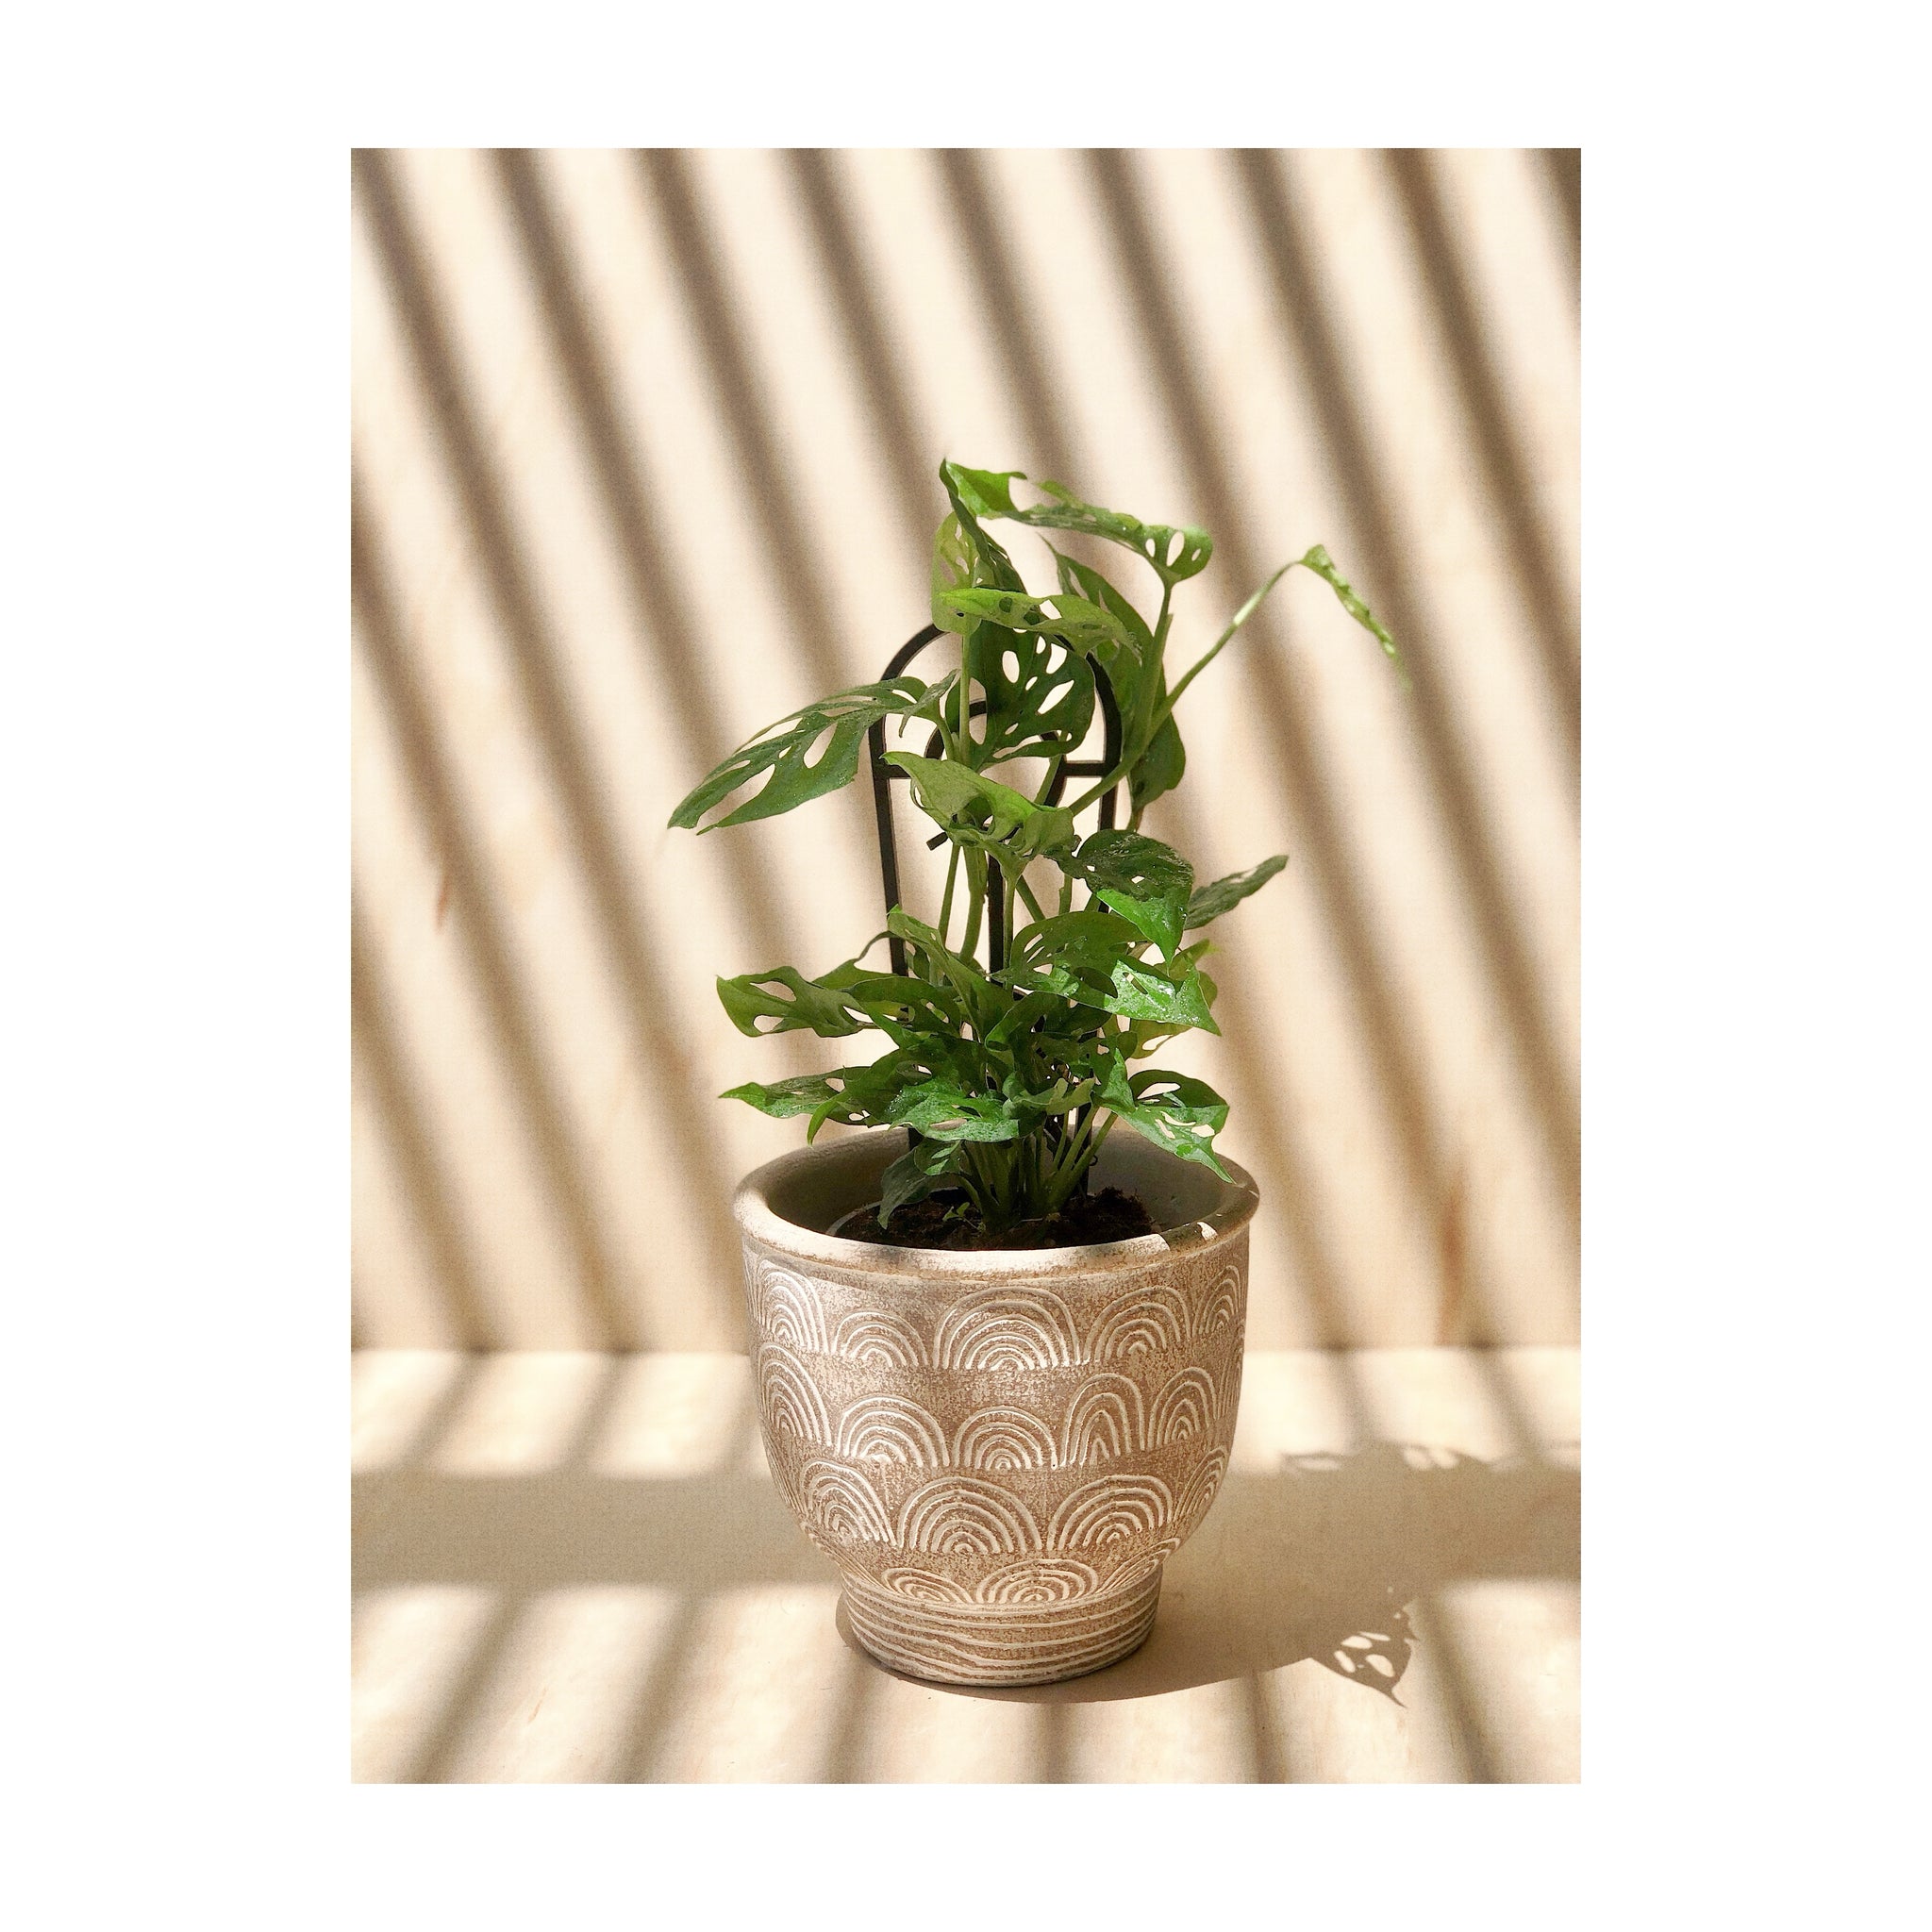 Inca Cement Decorative Plant Pot Natural paired with a Swiss Cheese Plant (Monstera Adansonii)